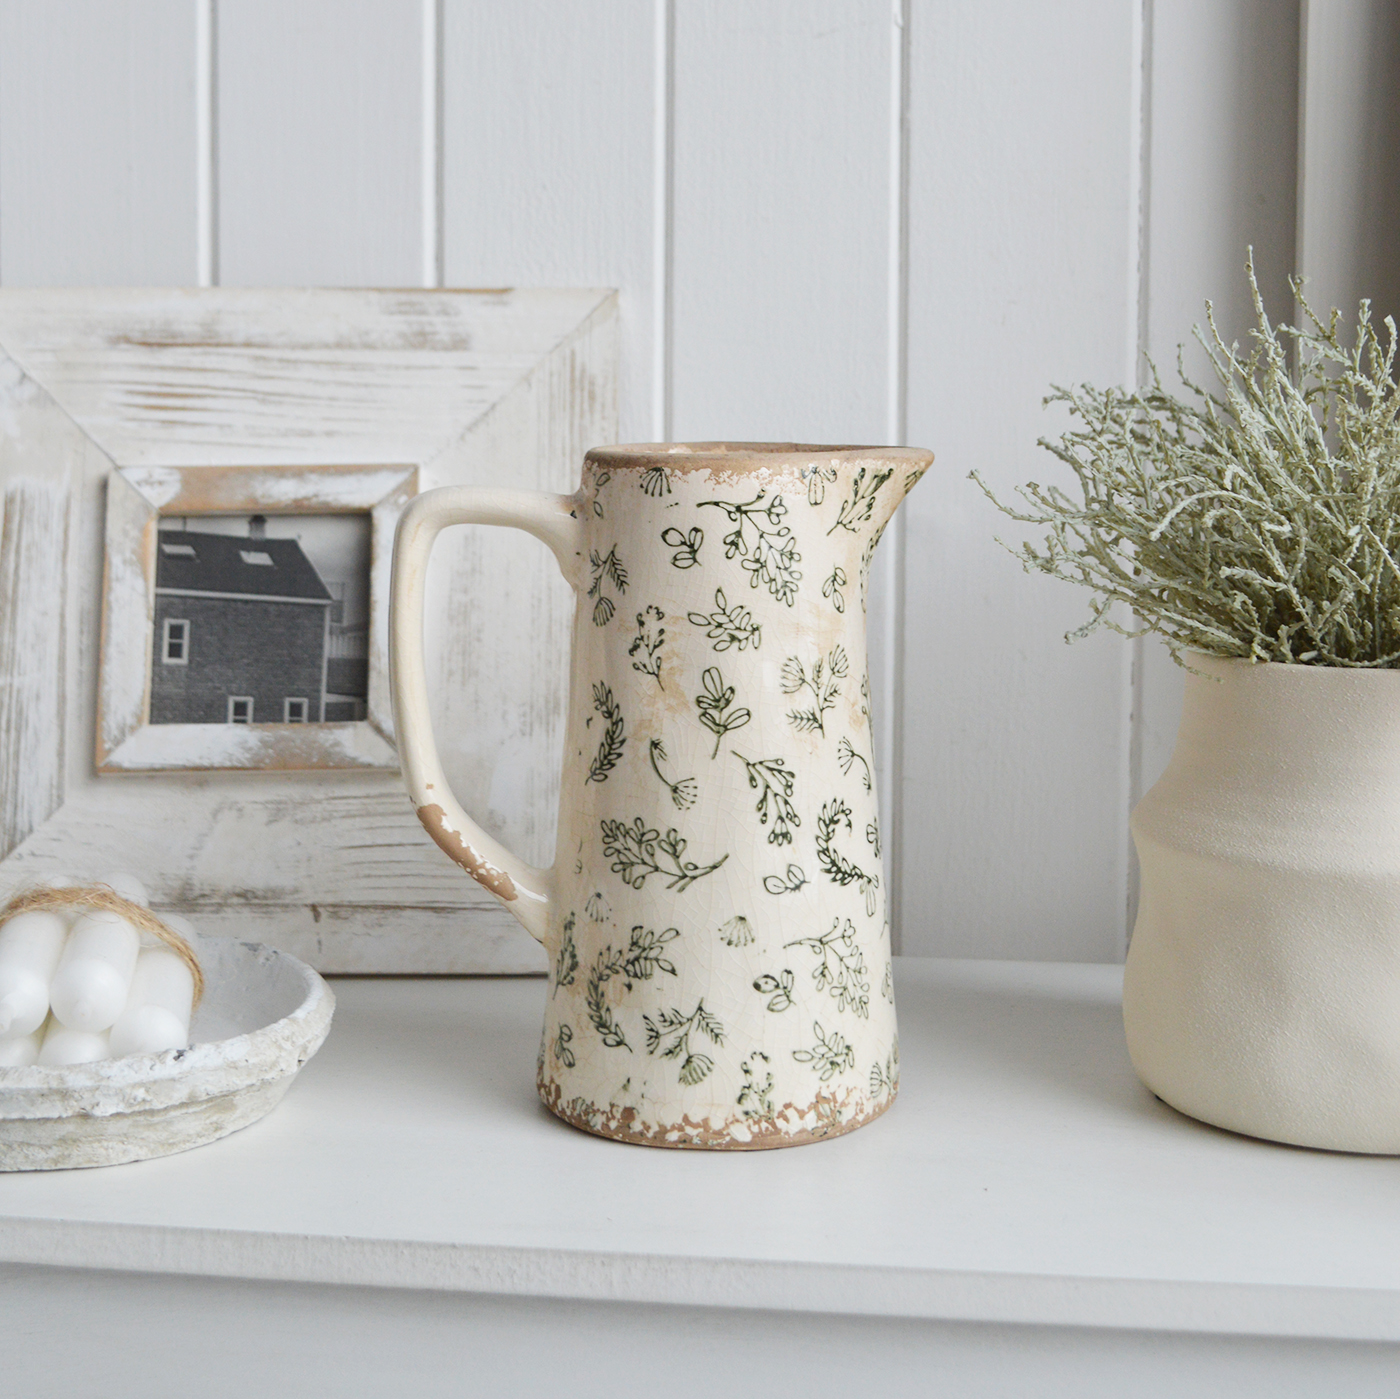 Westbrook Green and Aged White Ceramic Jug - New England, coastal, modern farmhouse and country homes interiors and furniture